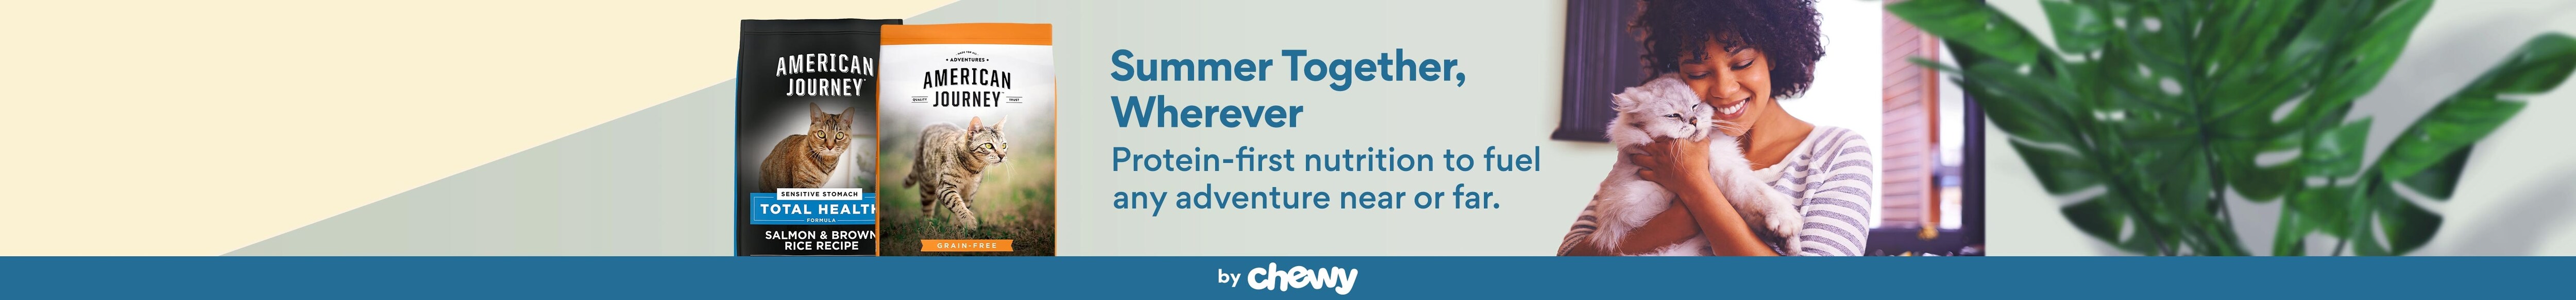 American Journey. Summer Together, Wherever. Protein-first nutrition to fuel any adventure near or far.